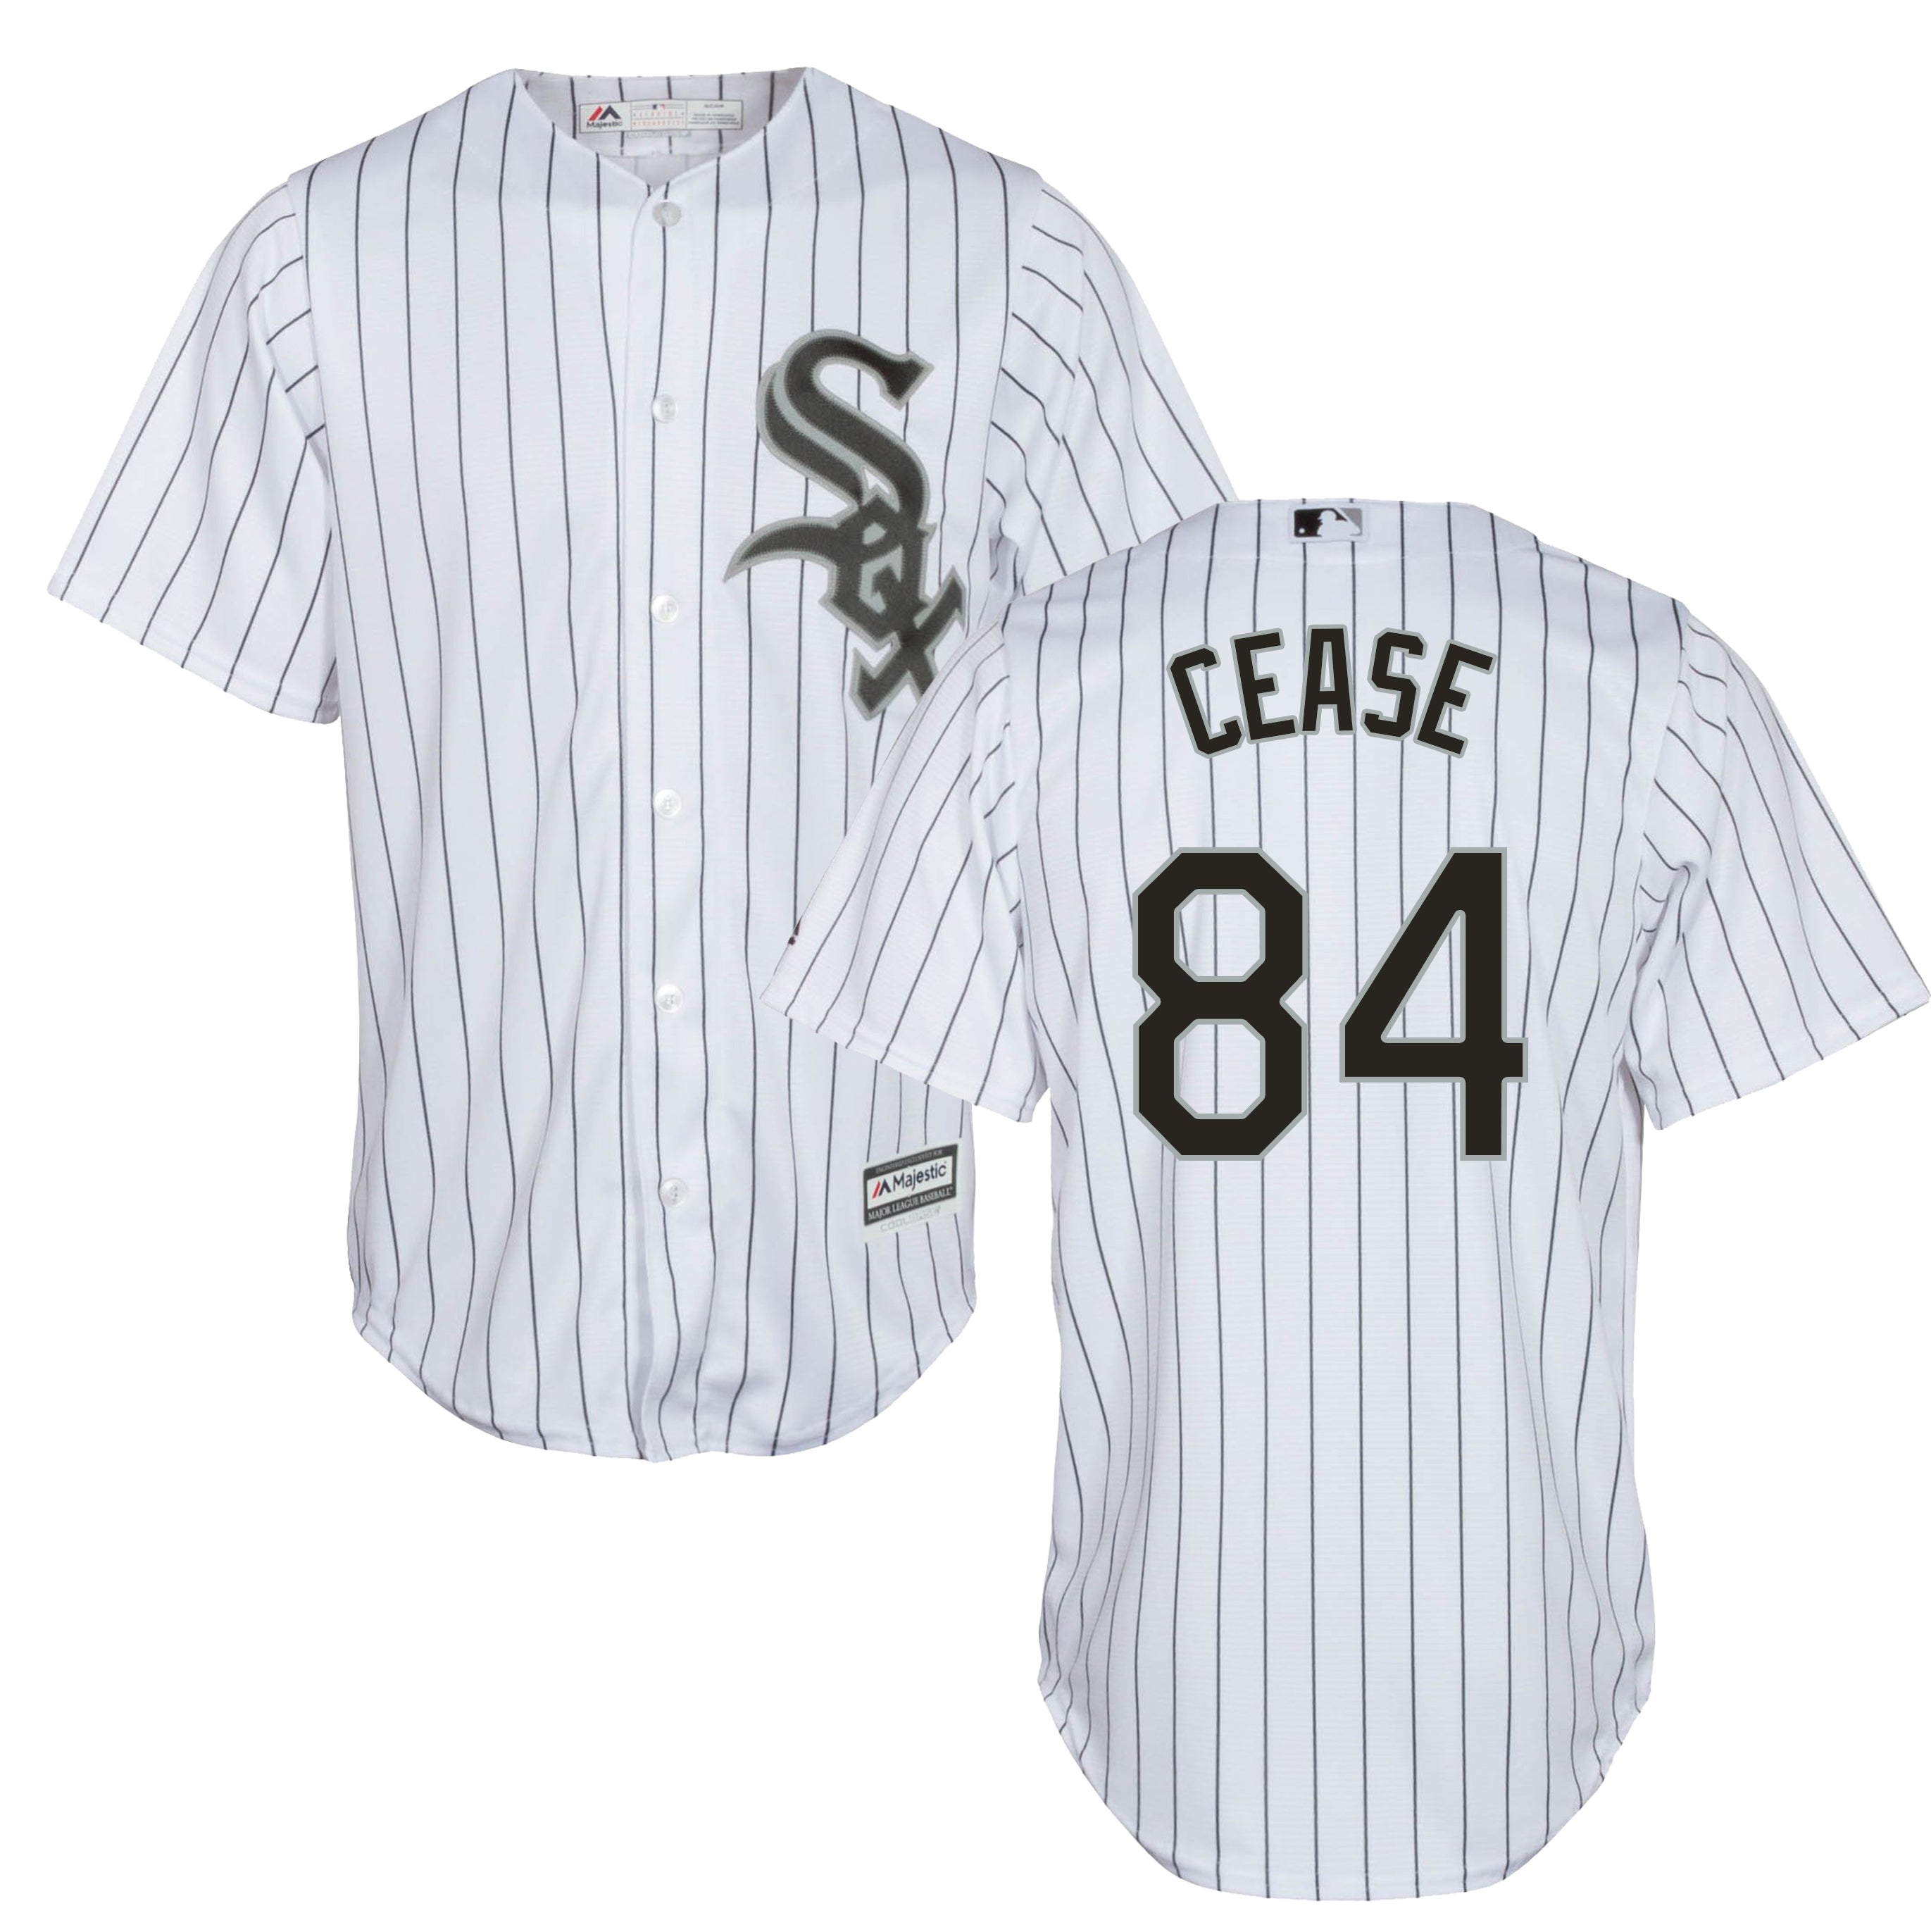  Majestic Athletic Chicago White Sox Custom Adult Small